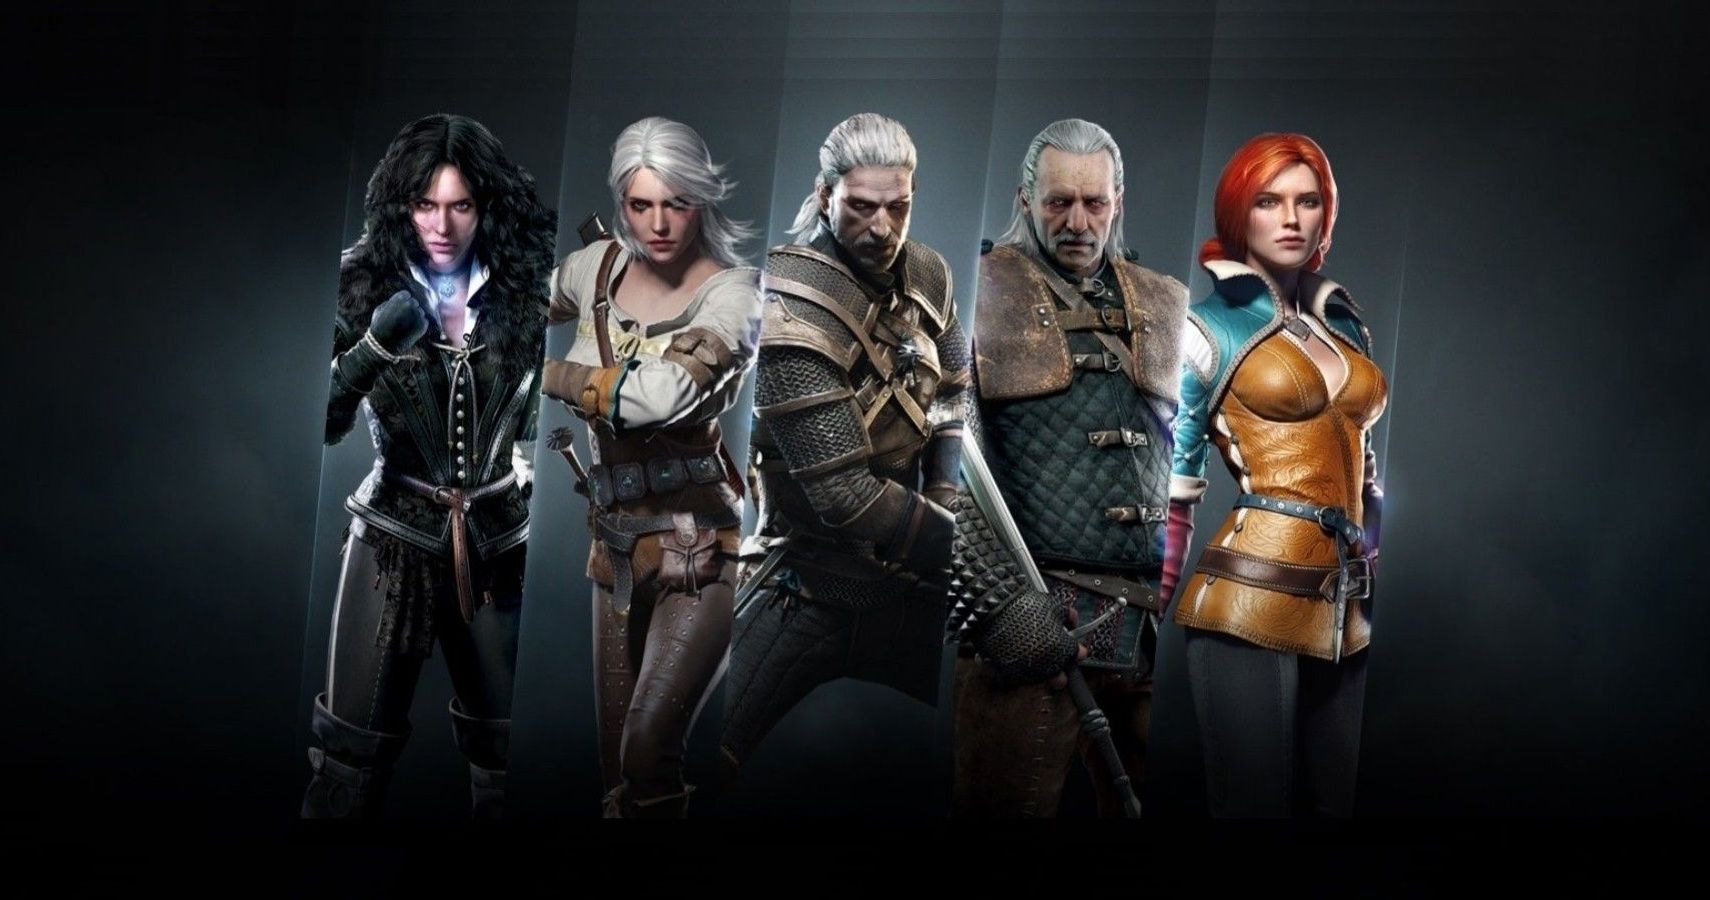 The Witcher 3: 10 Best Characters From The Main Questline, Ranked